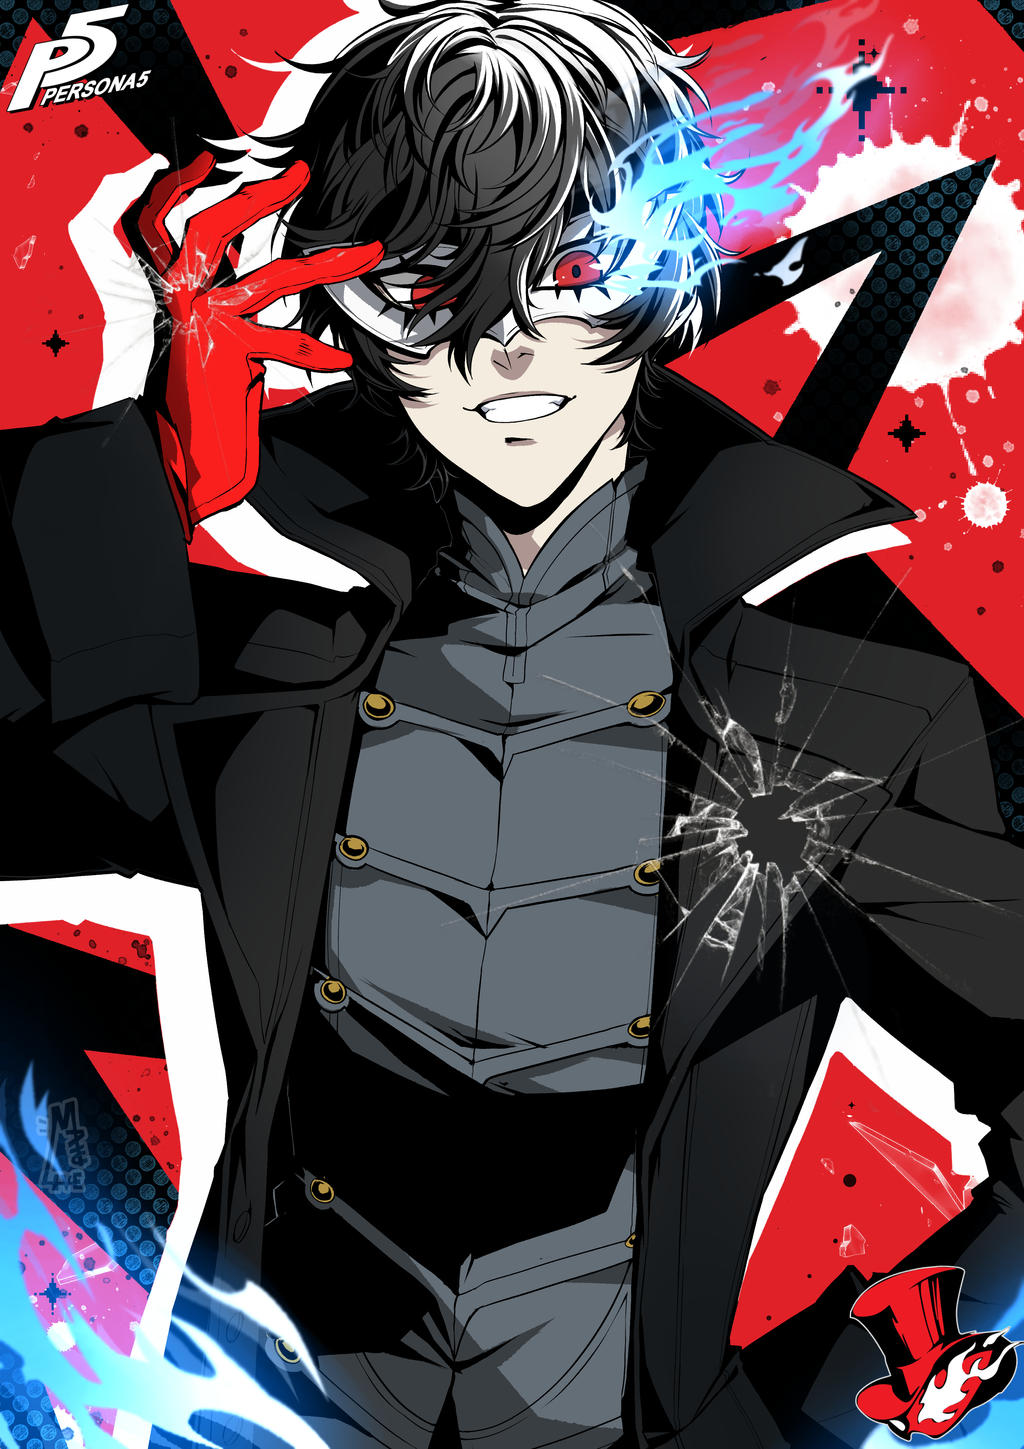 Joker Persona 5 by MaiuLive on DeviantArt